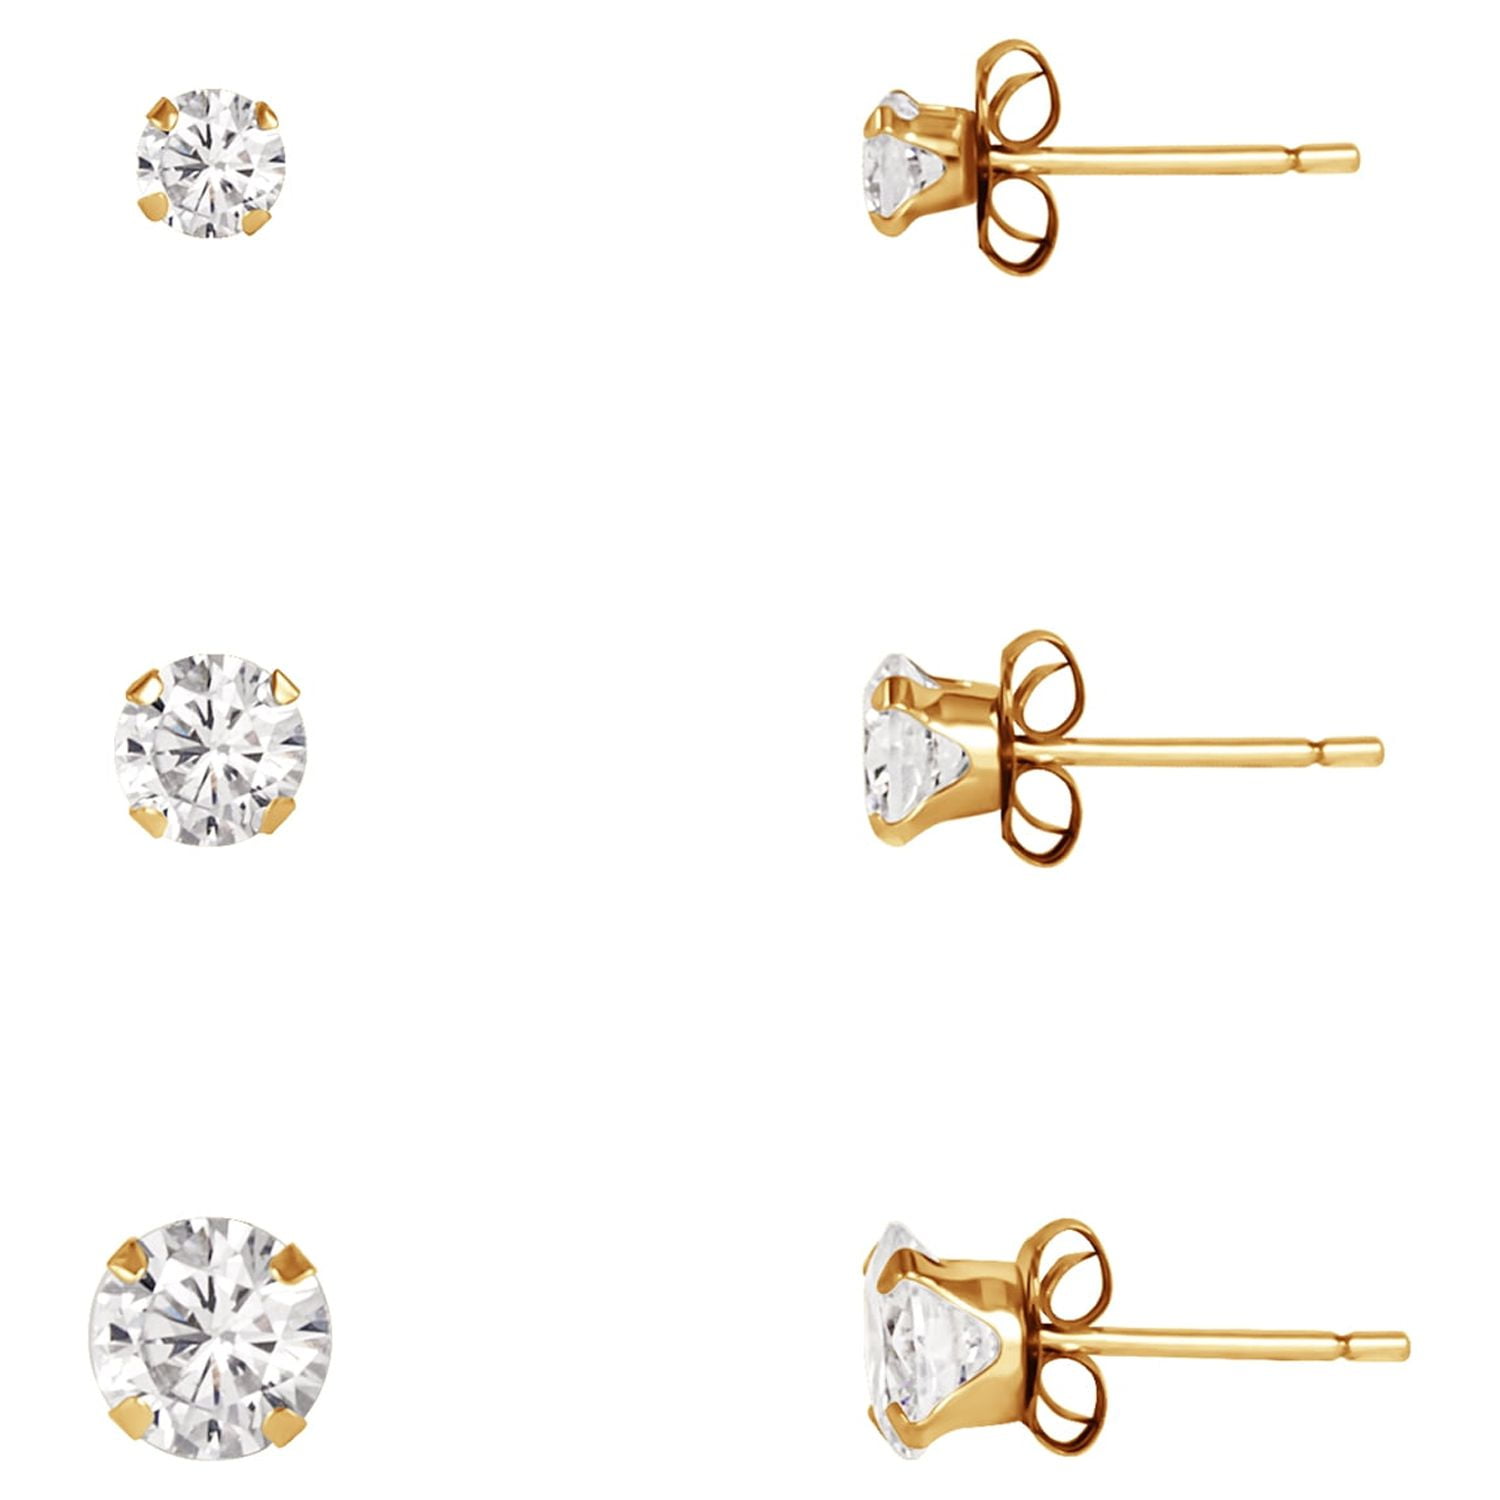 Small Size J Type South Screw Stone Stud Earrings Gold covering ER25489